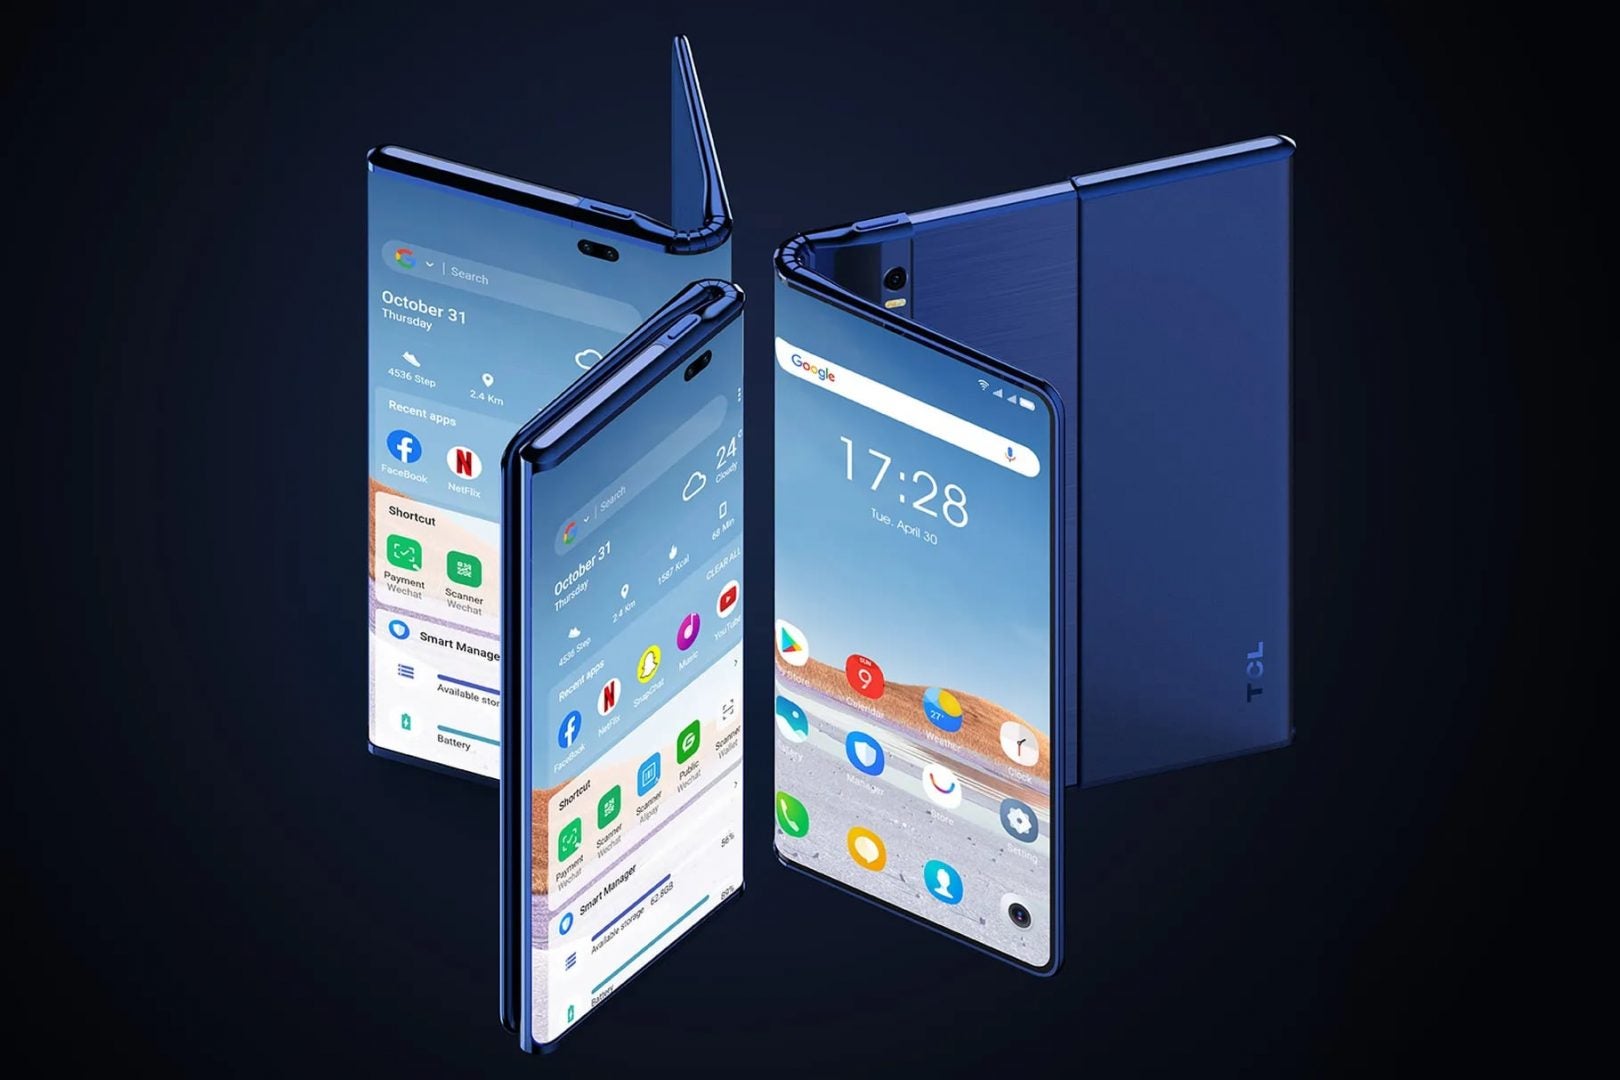 TCL shows off wacky take on foldable phones that just might work